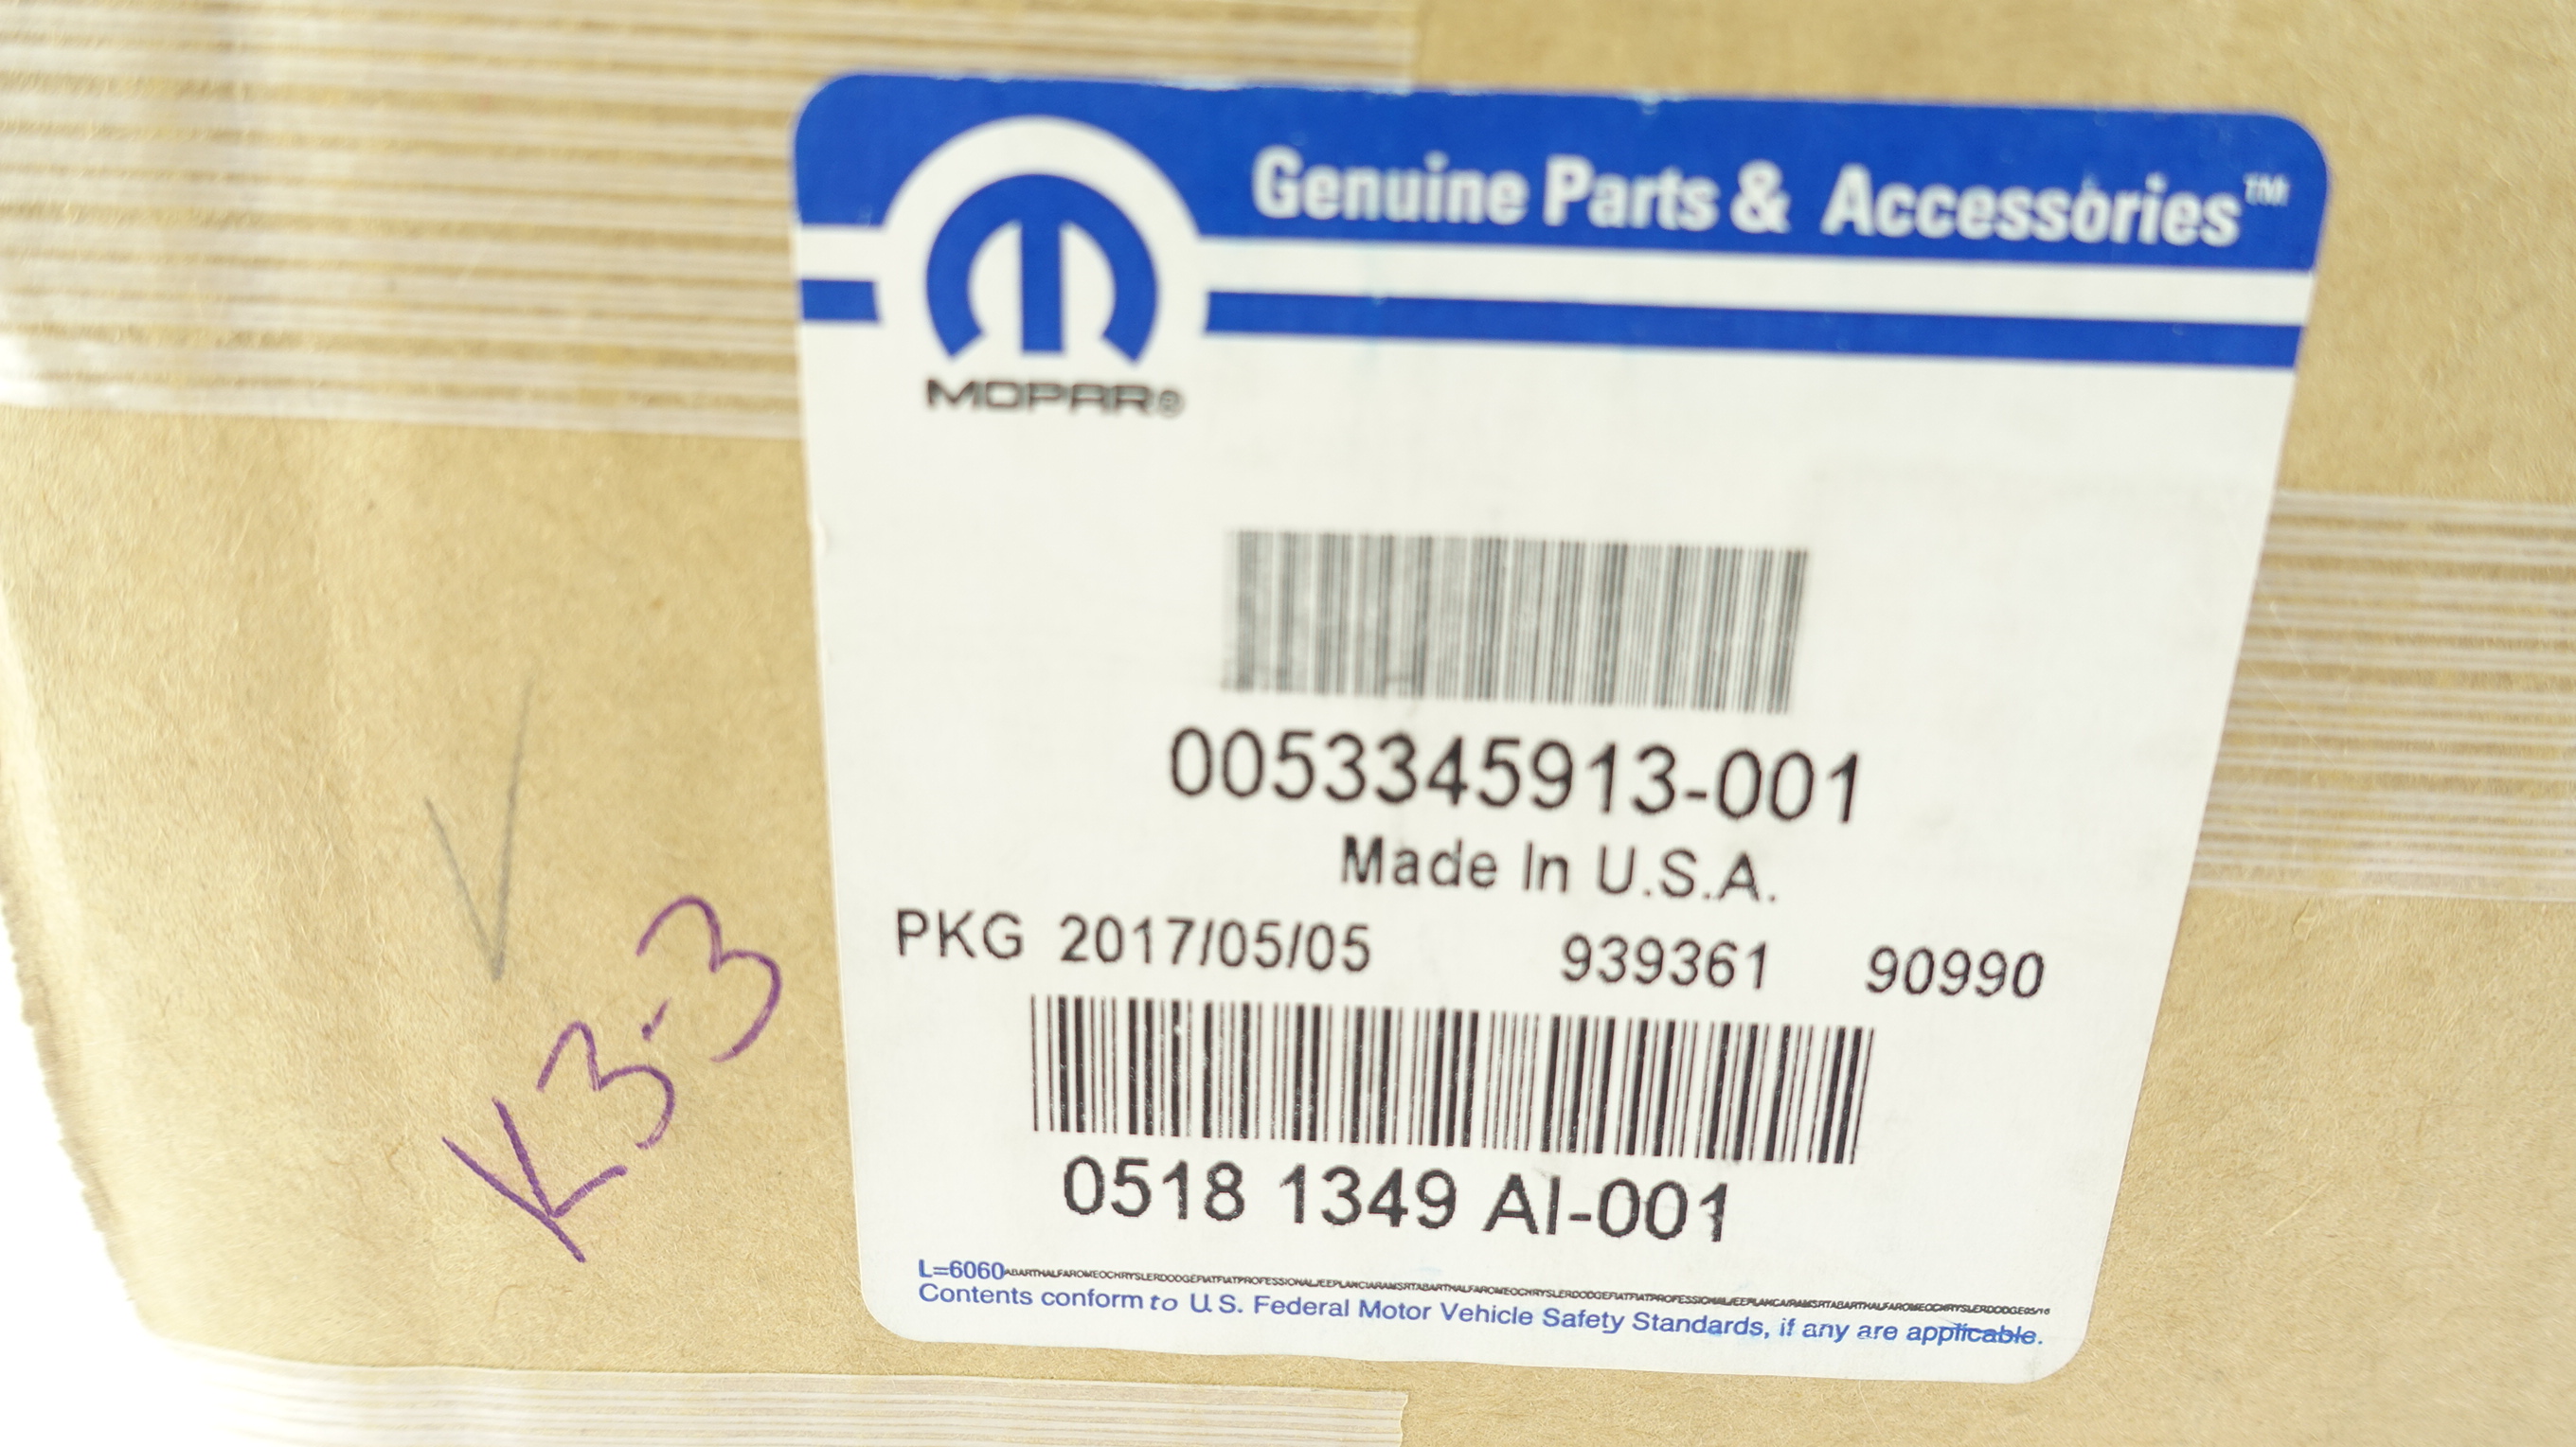 New Genuine OEM Mopar 5181349-AI Shock Absorber Front Fast Free Shipping - image 10